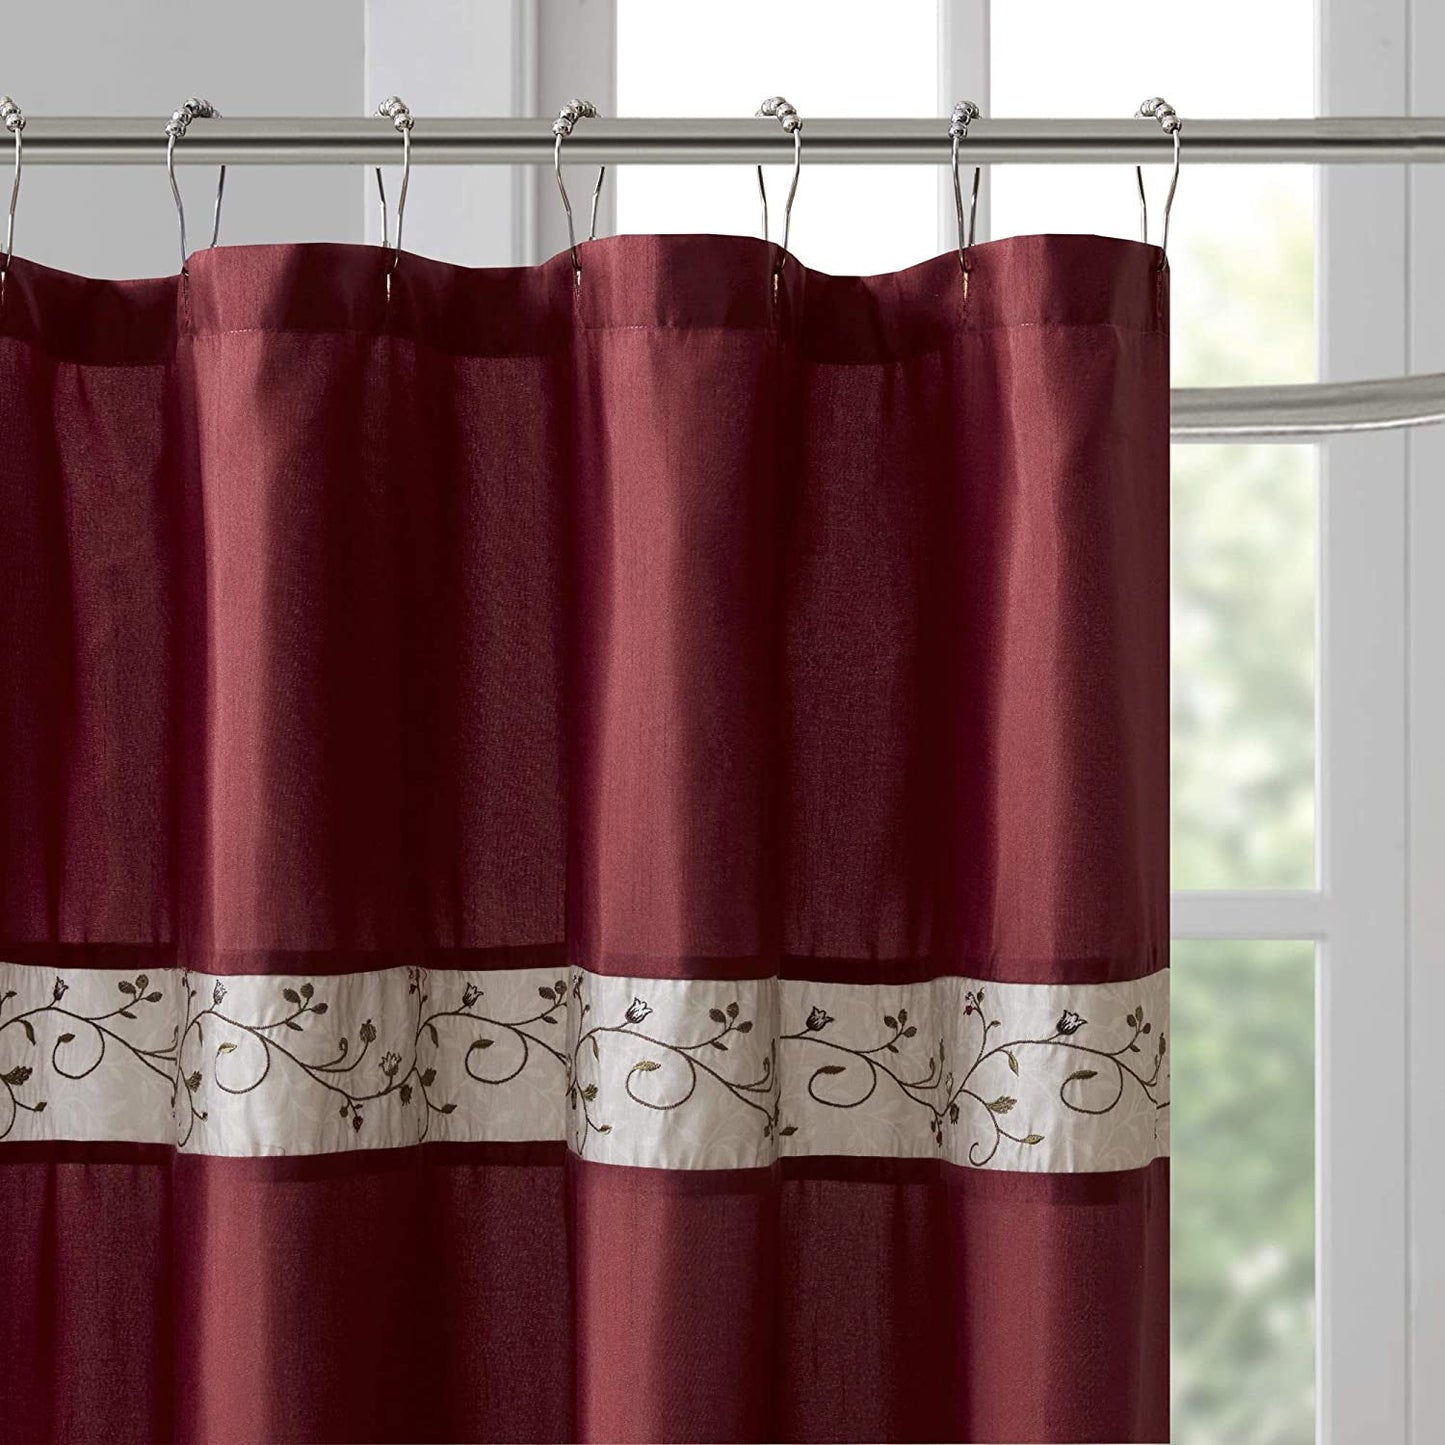 Madison Park Serene Flora Fabric Shower Curtain, Mbroidered Transitional Shower Curtains for Bathroom, 72" X 72", Red